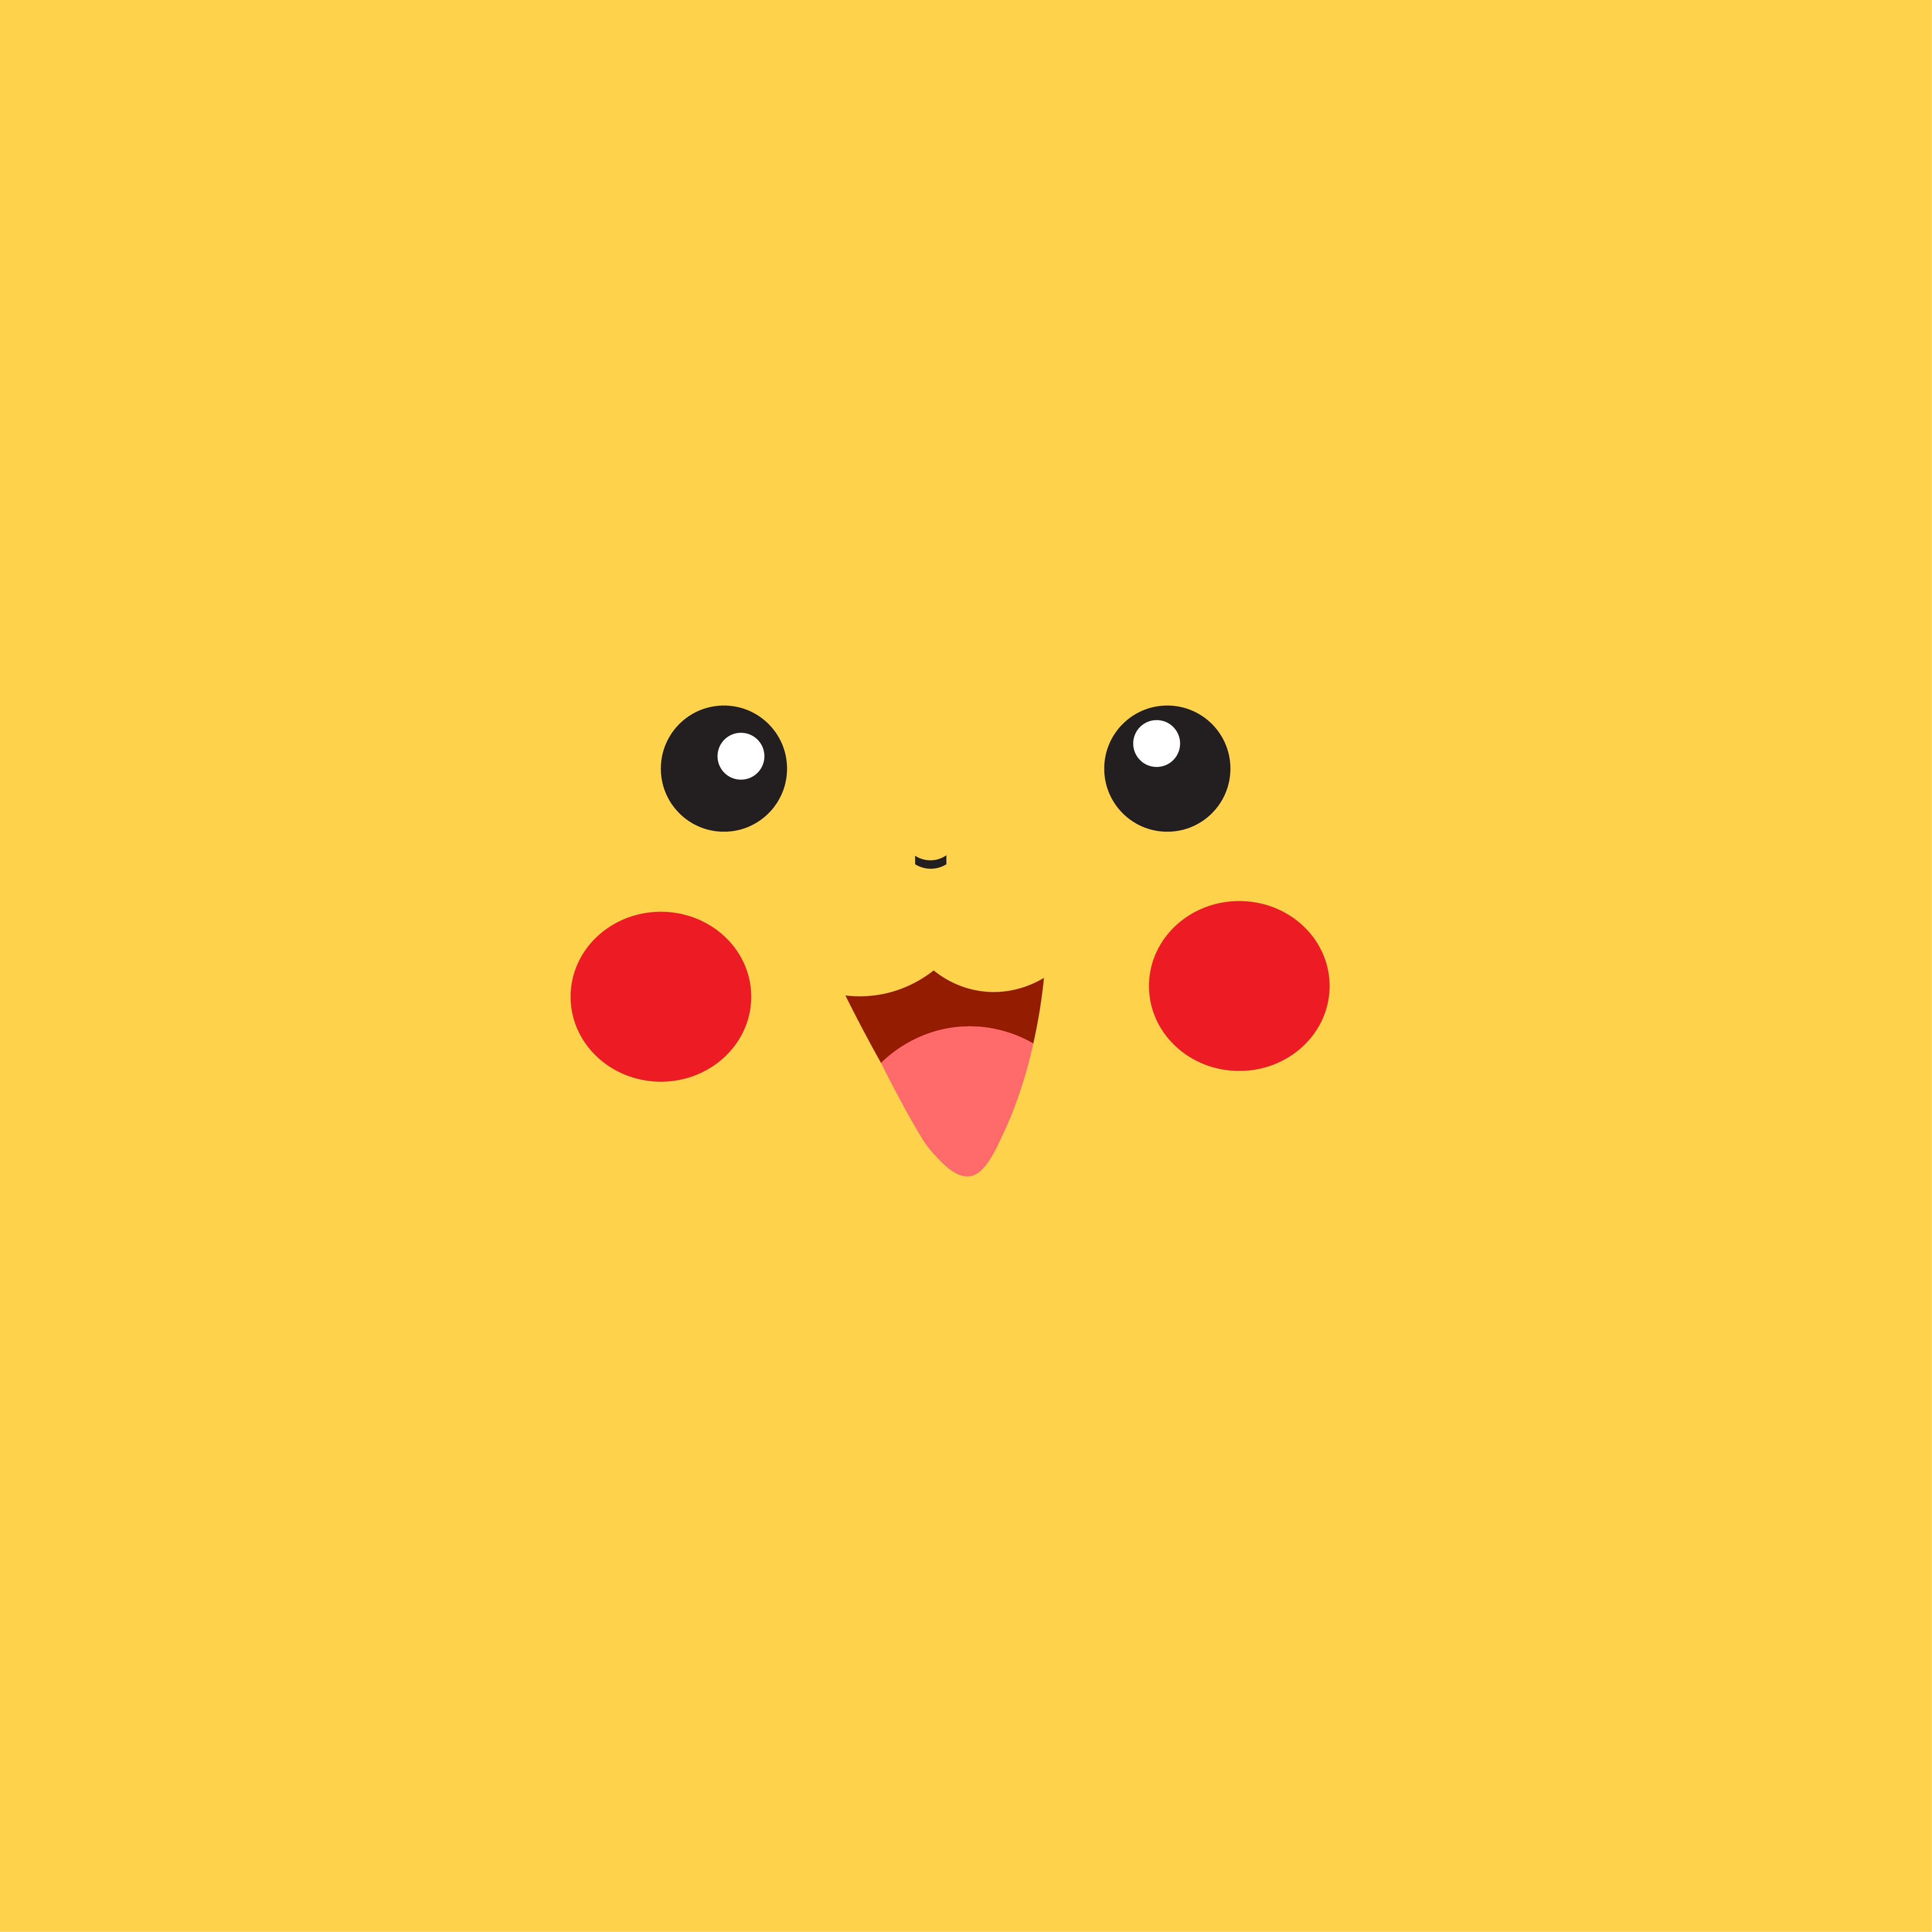 pikachuface